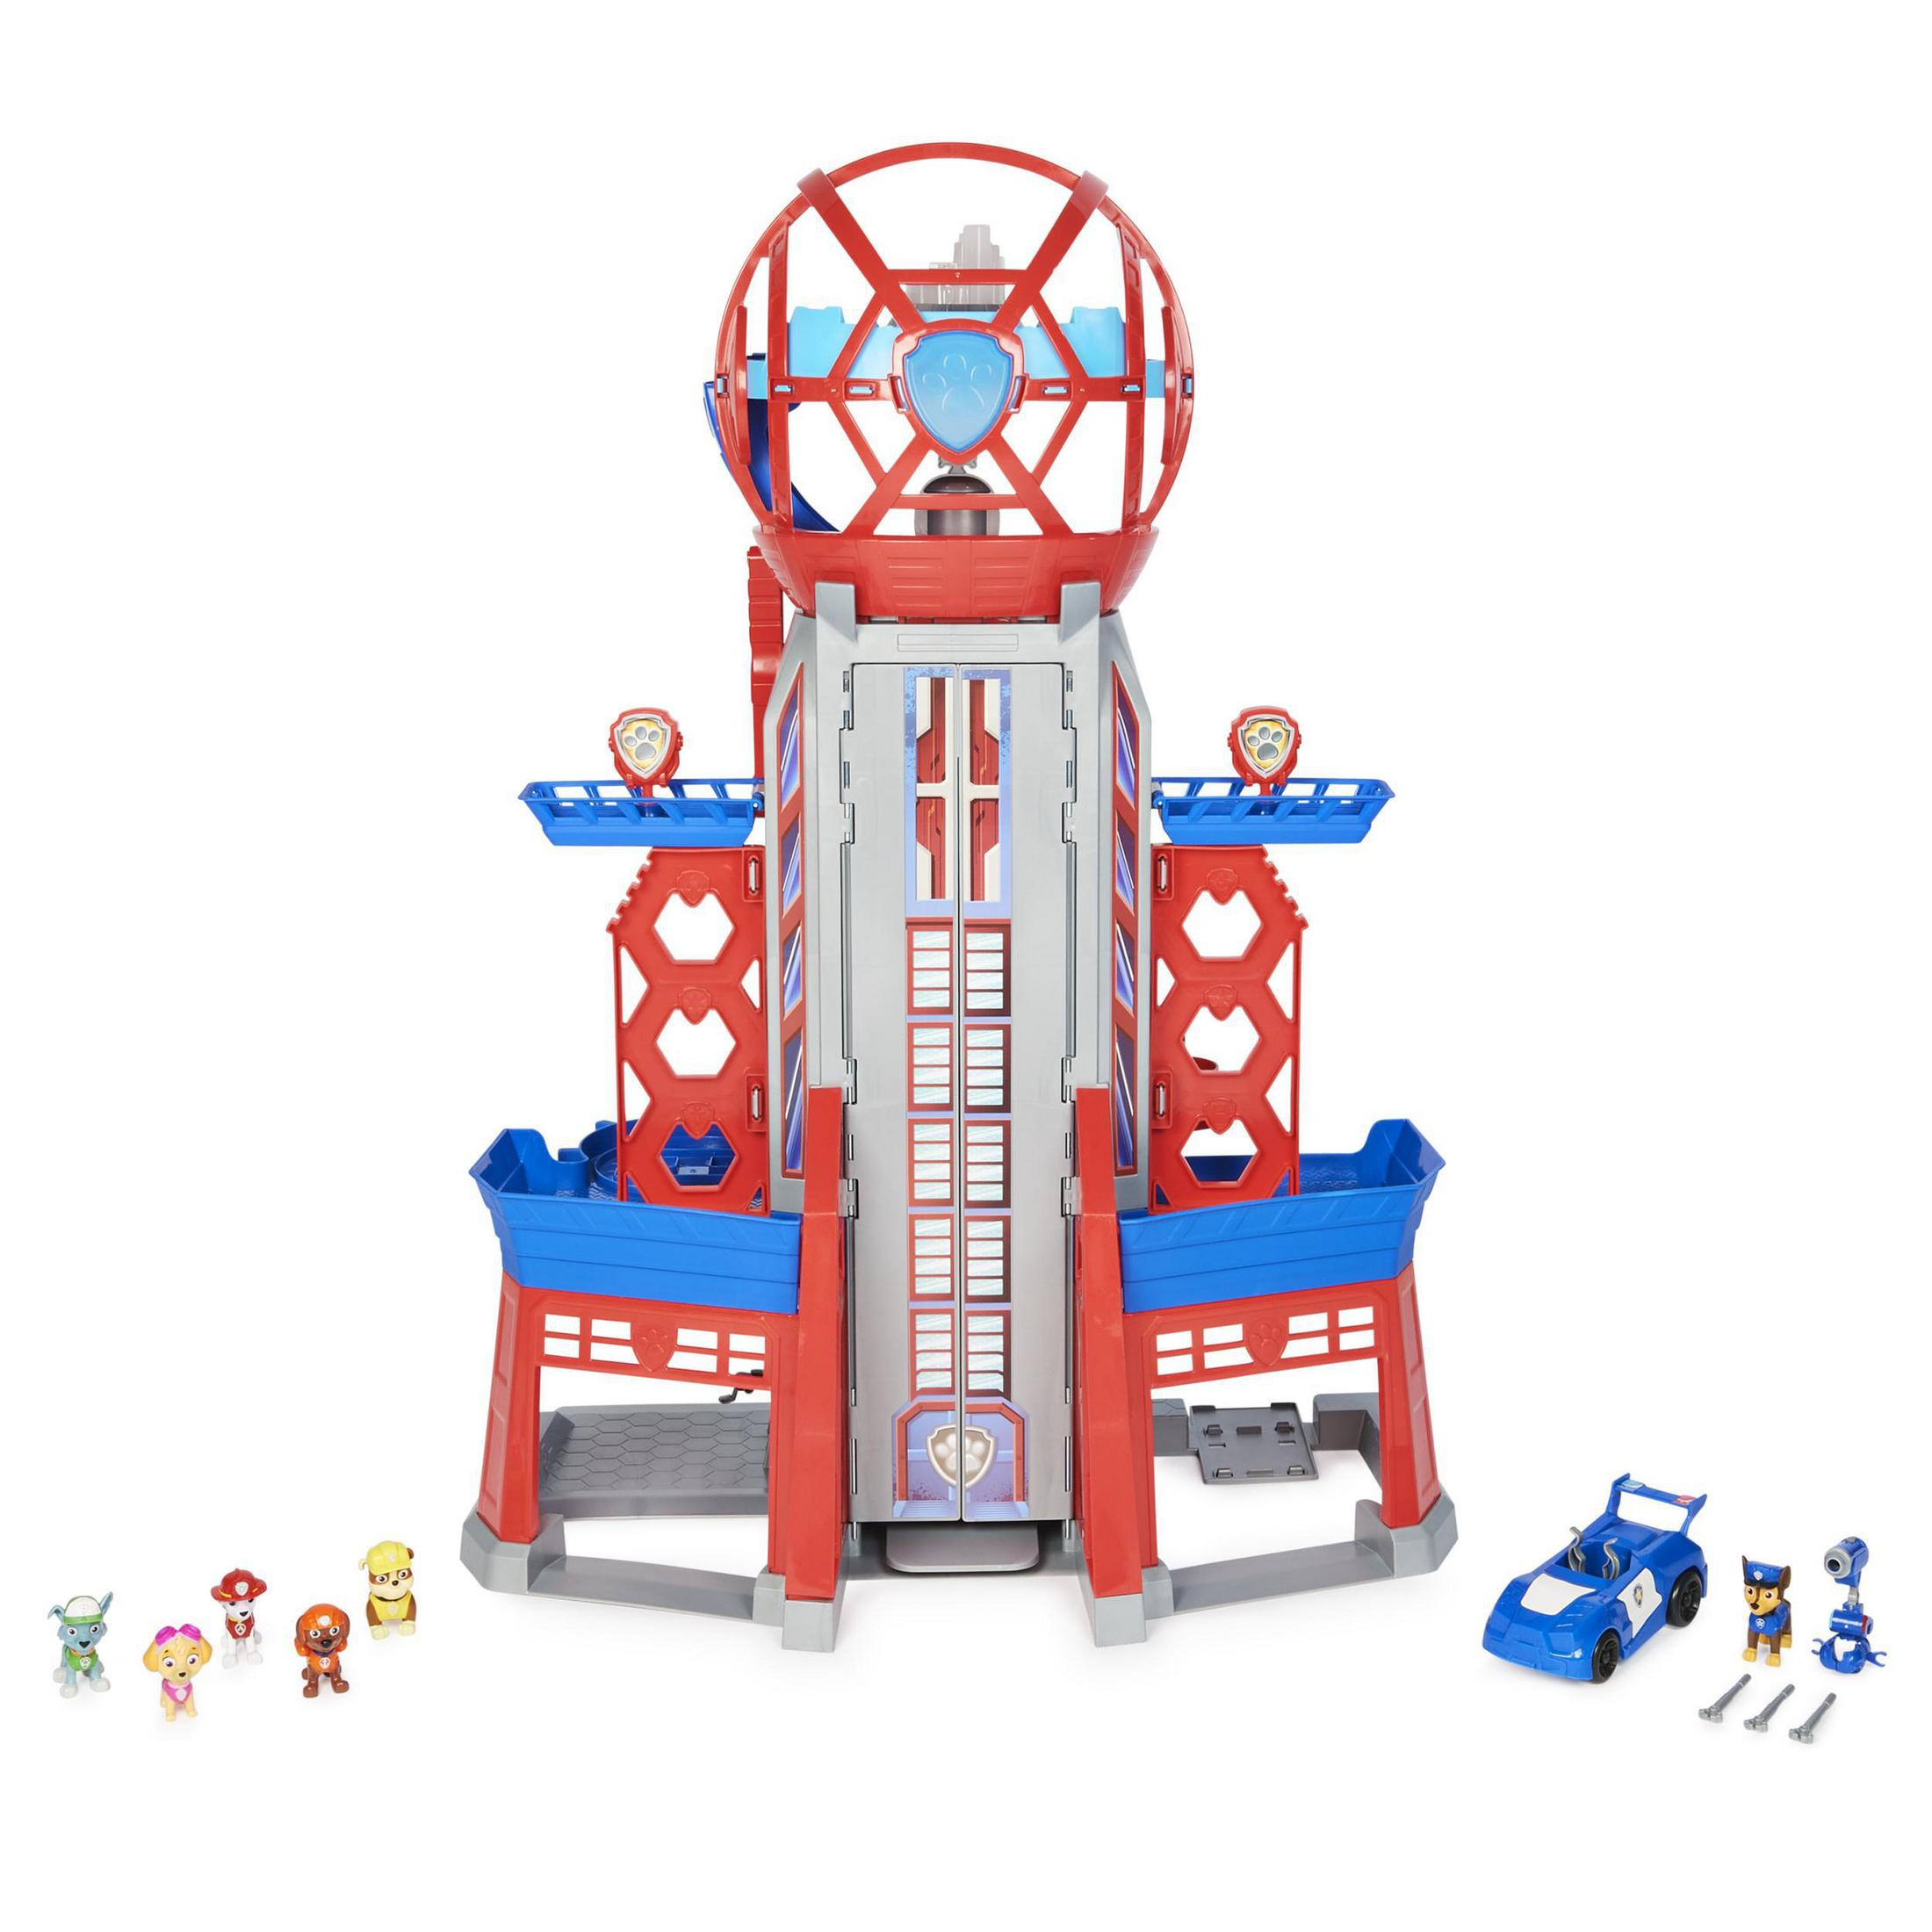 MASTER MOVIE CITY Spielset TOWER ADVENTURE Mehrfarbig 36352 LIFESIZE SPIN PAW